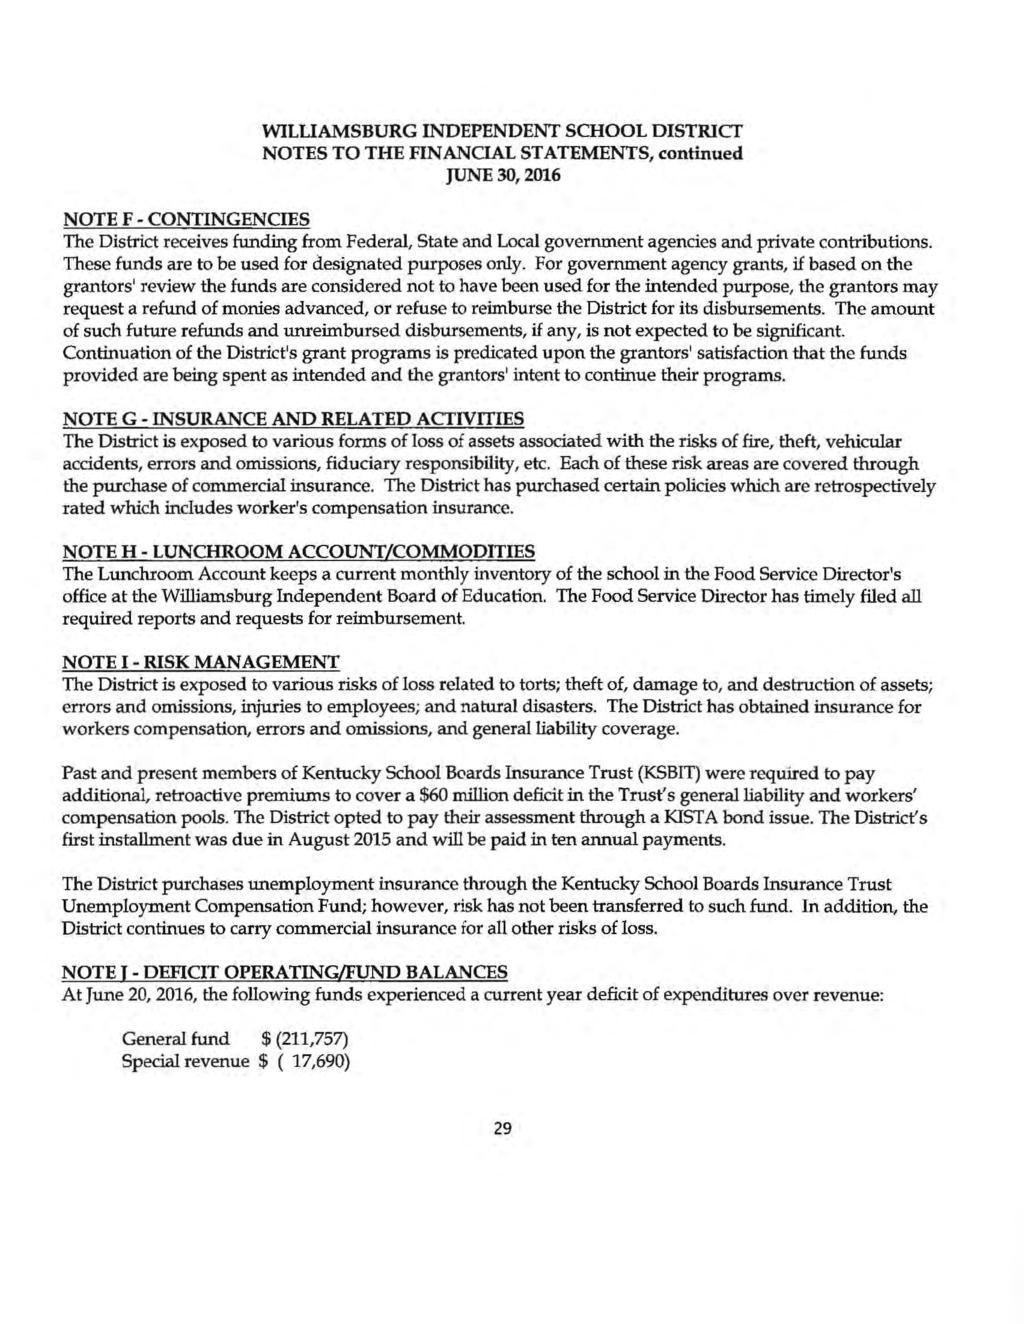 WILliAMSBURG INDEPENDENT SCHOOL DISTRICT NOTES TO THE FINANOAL STATEMENTS, continued JUNE 30, 2016 NOTE F - CONTINGENCIES The District receives funding from Federal, State and Local government